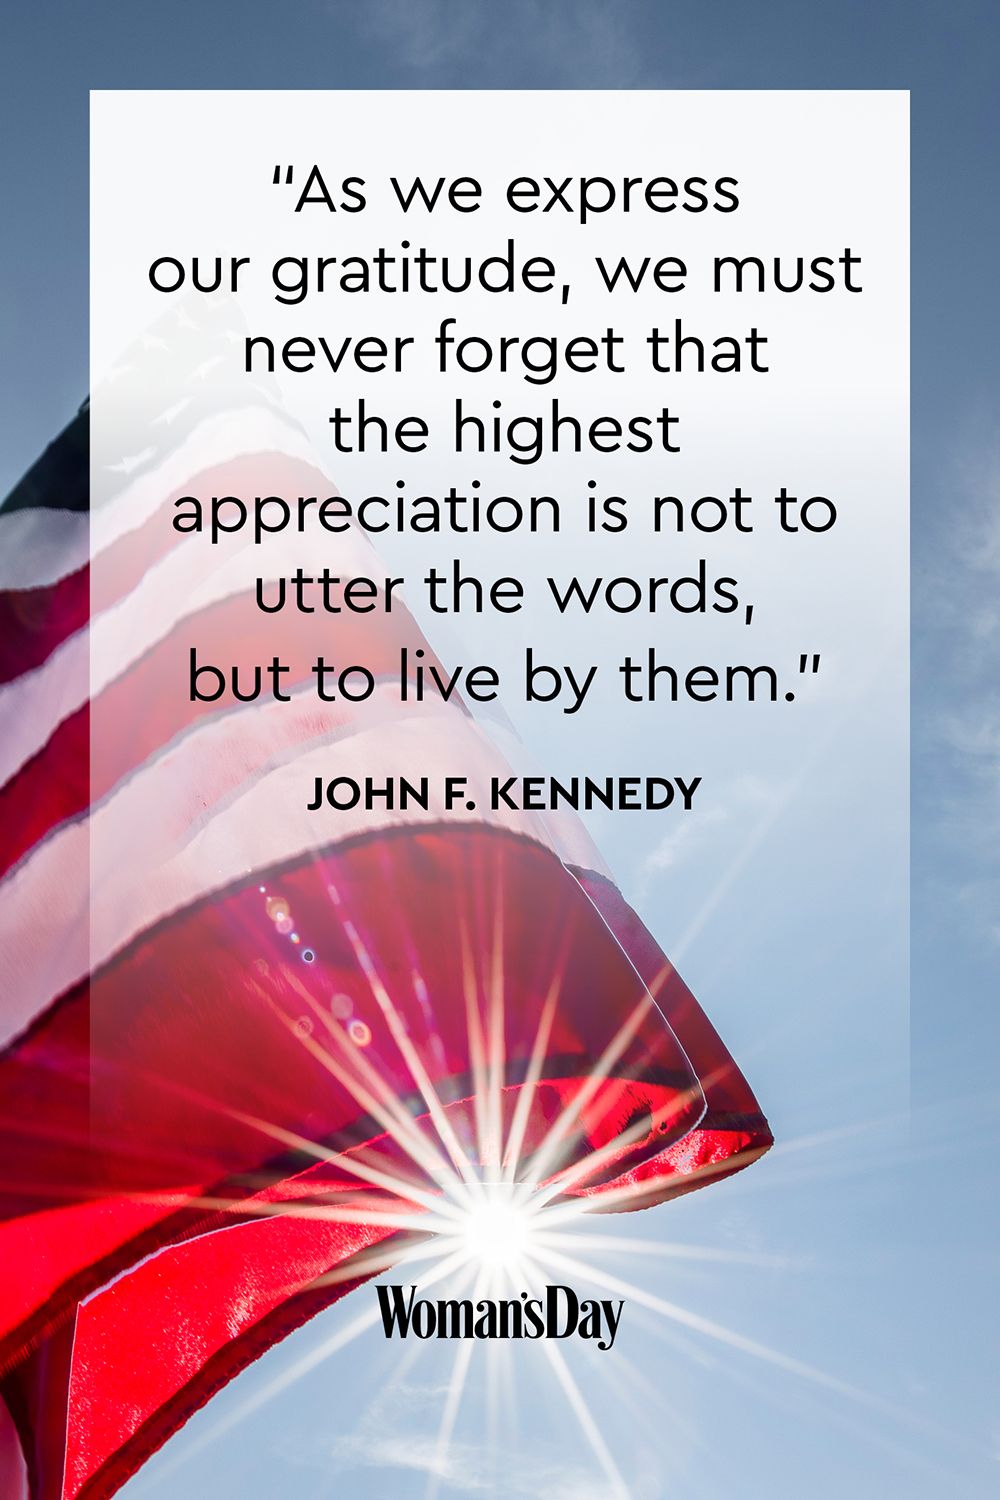 as we express our gratitude we must never forget that the highest appreciation is not to utter the words but to live by them. john f. kennedy